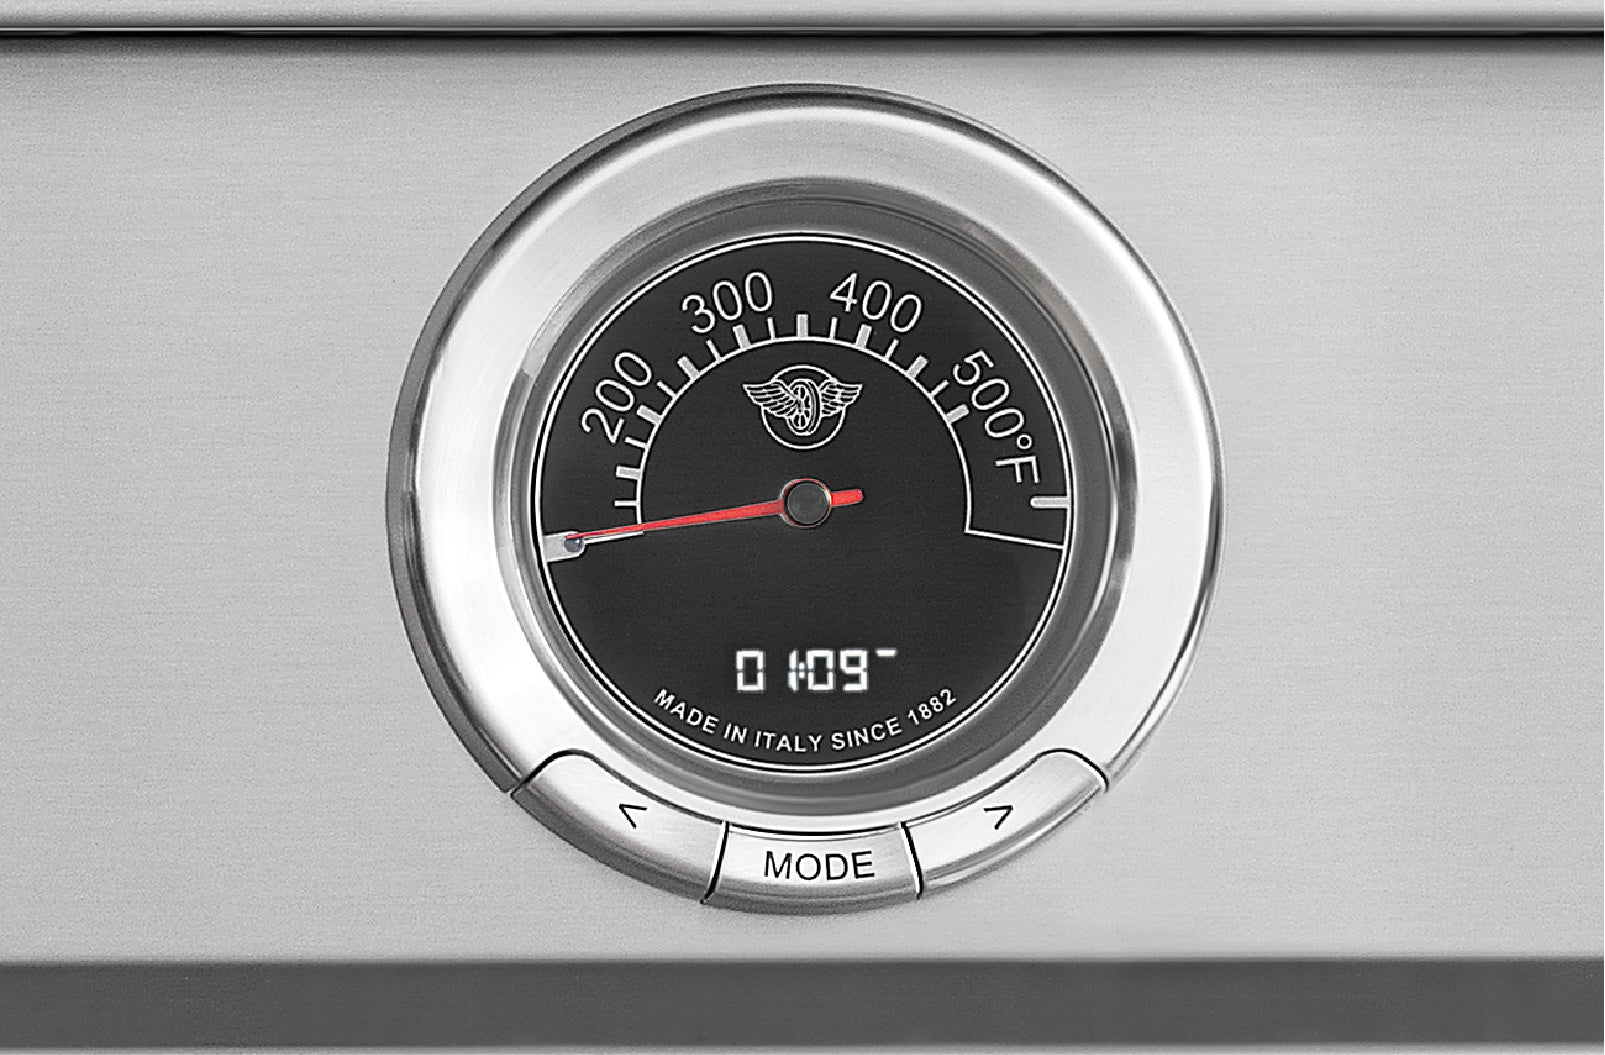 Bertazzoni - 48 inch Induction Range, 6 Heating Zones and Cast Iron Griddle, Electric Self-Clean Oven - MAS486IGFEPXT